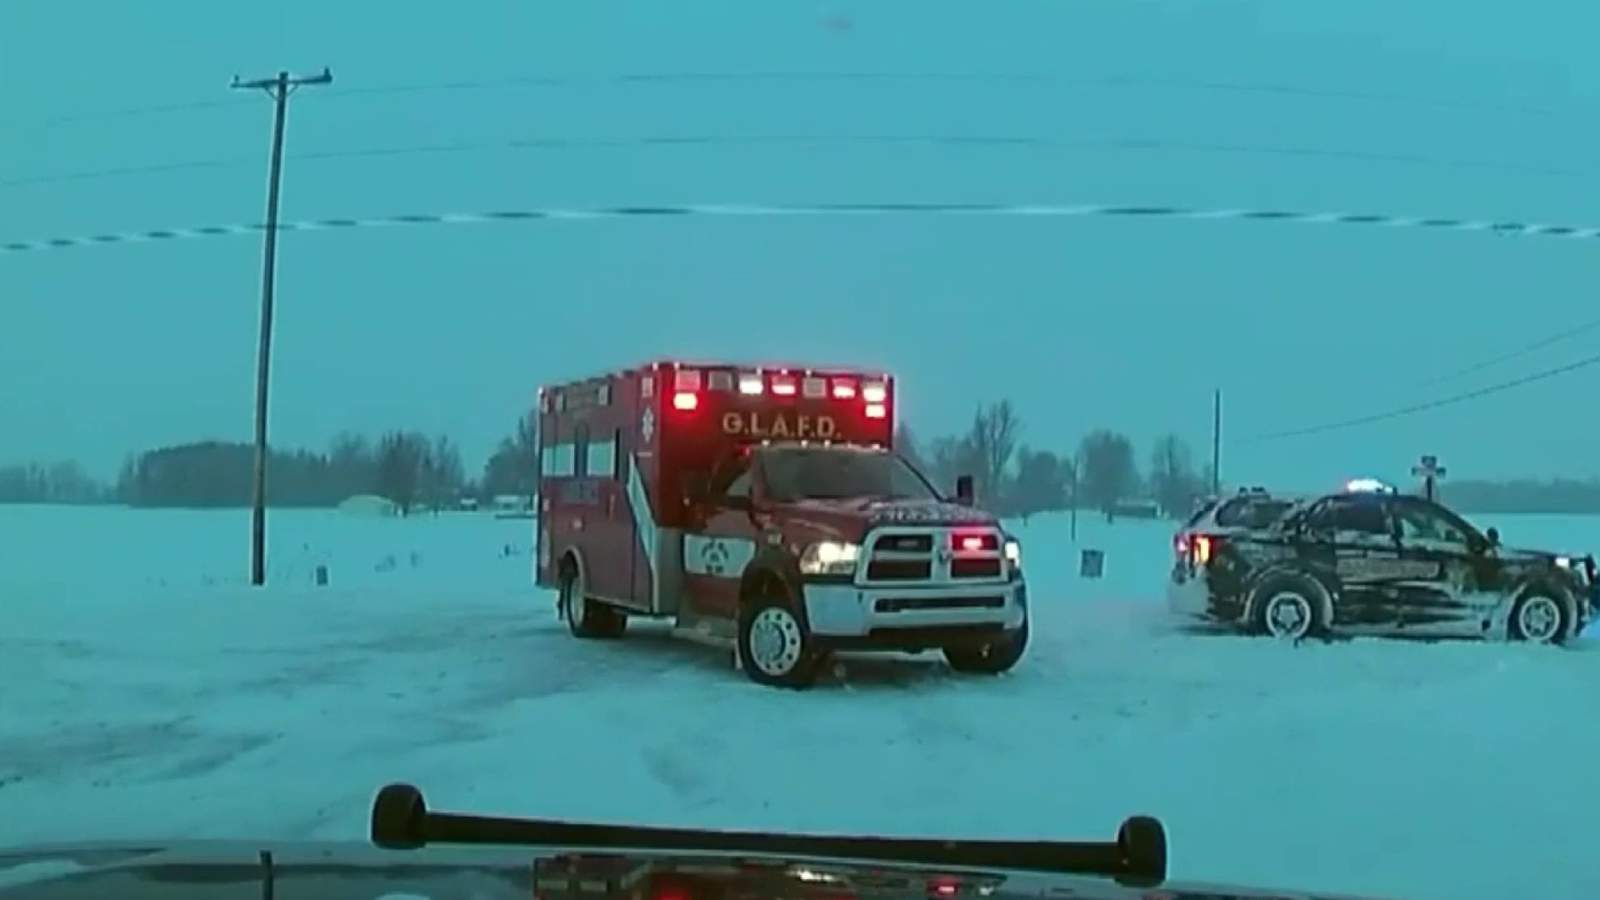 Eaton County woman rescued from subzero temperatures after car gets stuck in snow